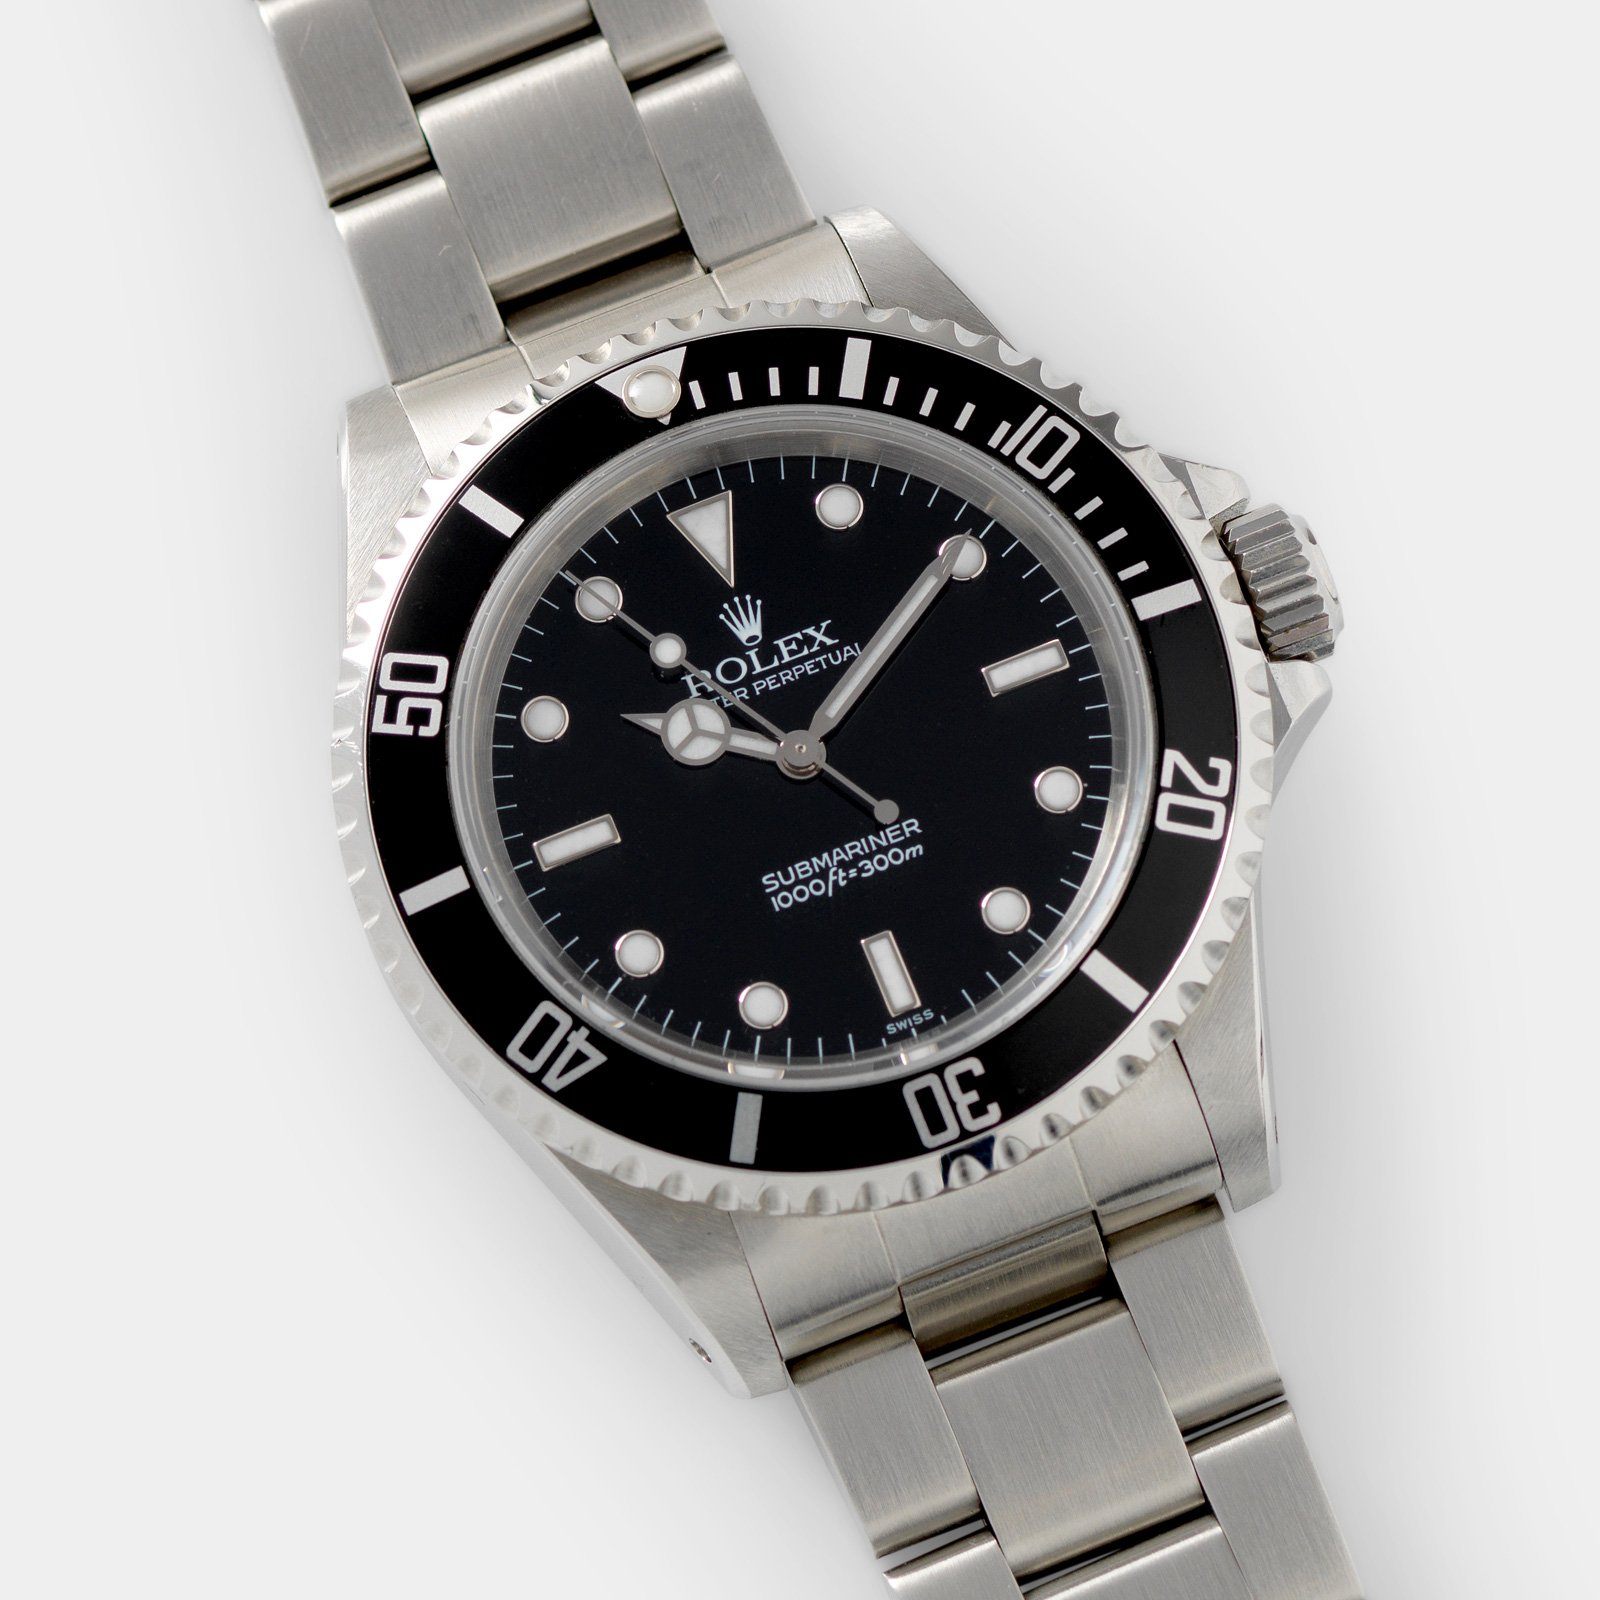 Rolex Submariner Swiss Only Dial Reference 14060 on 93150 Oyster bracelet